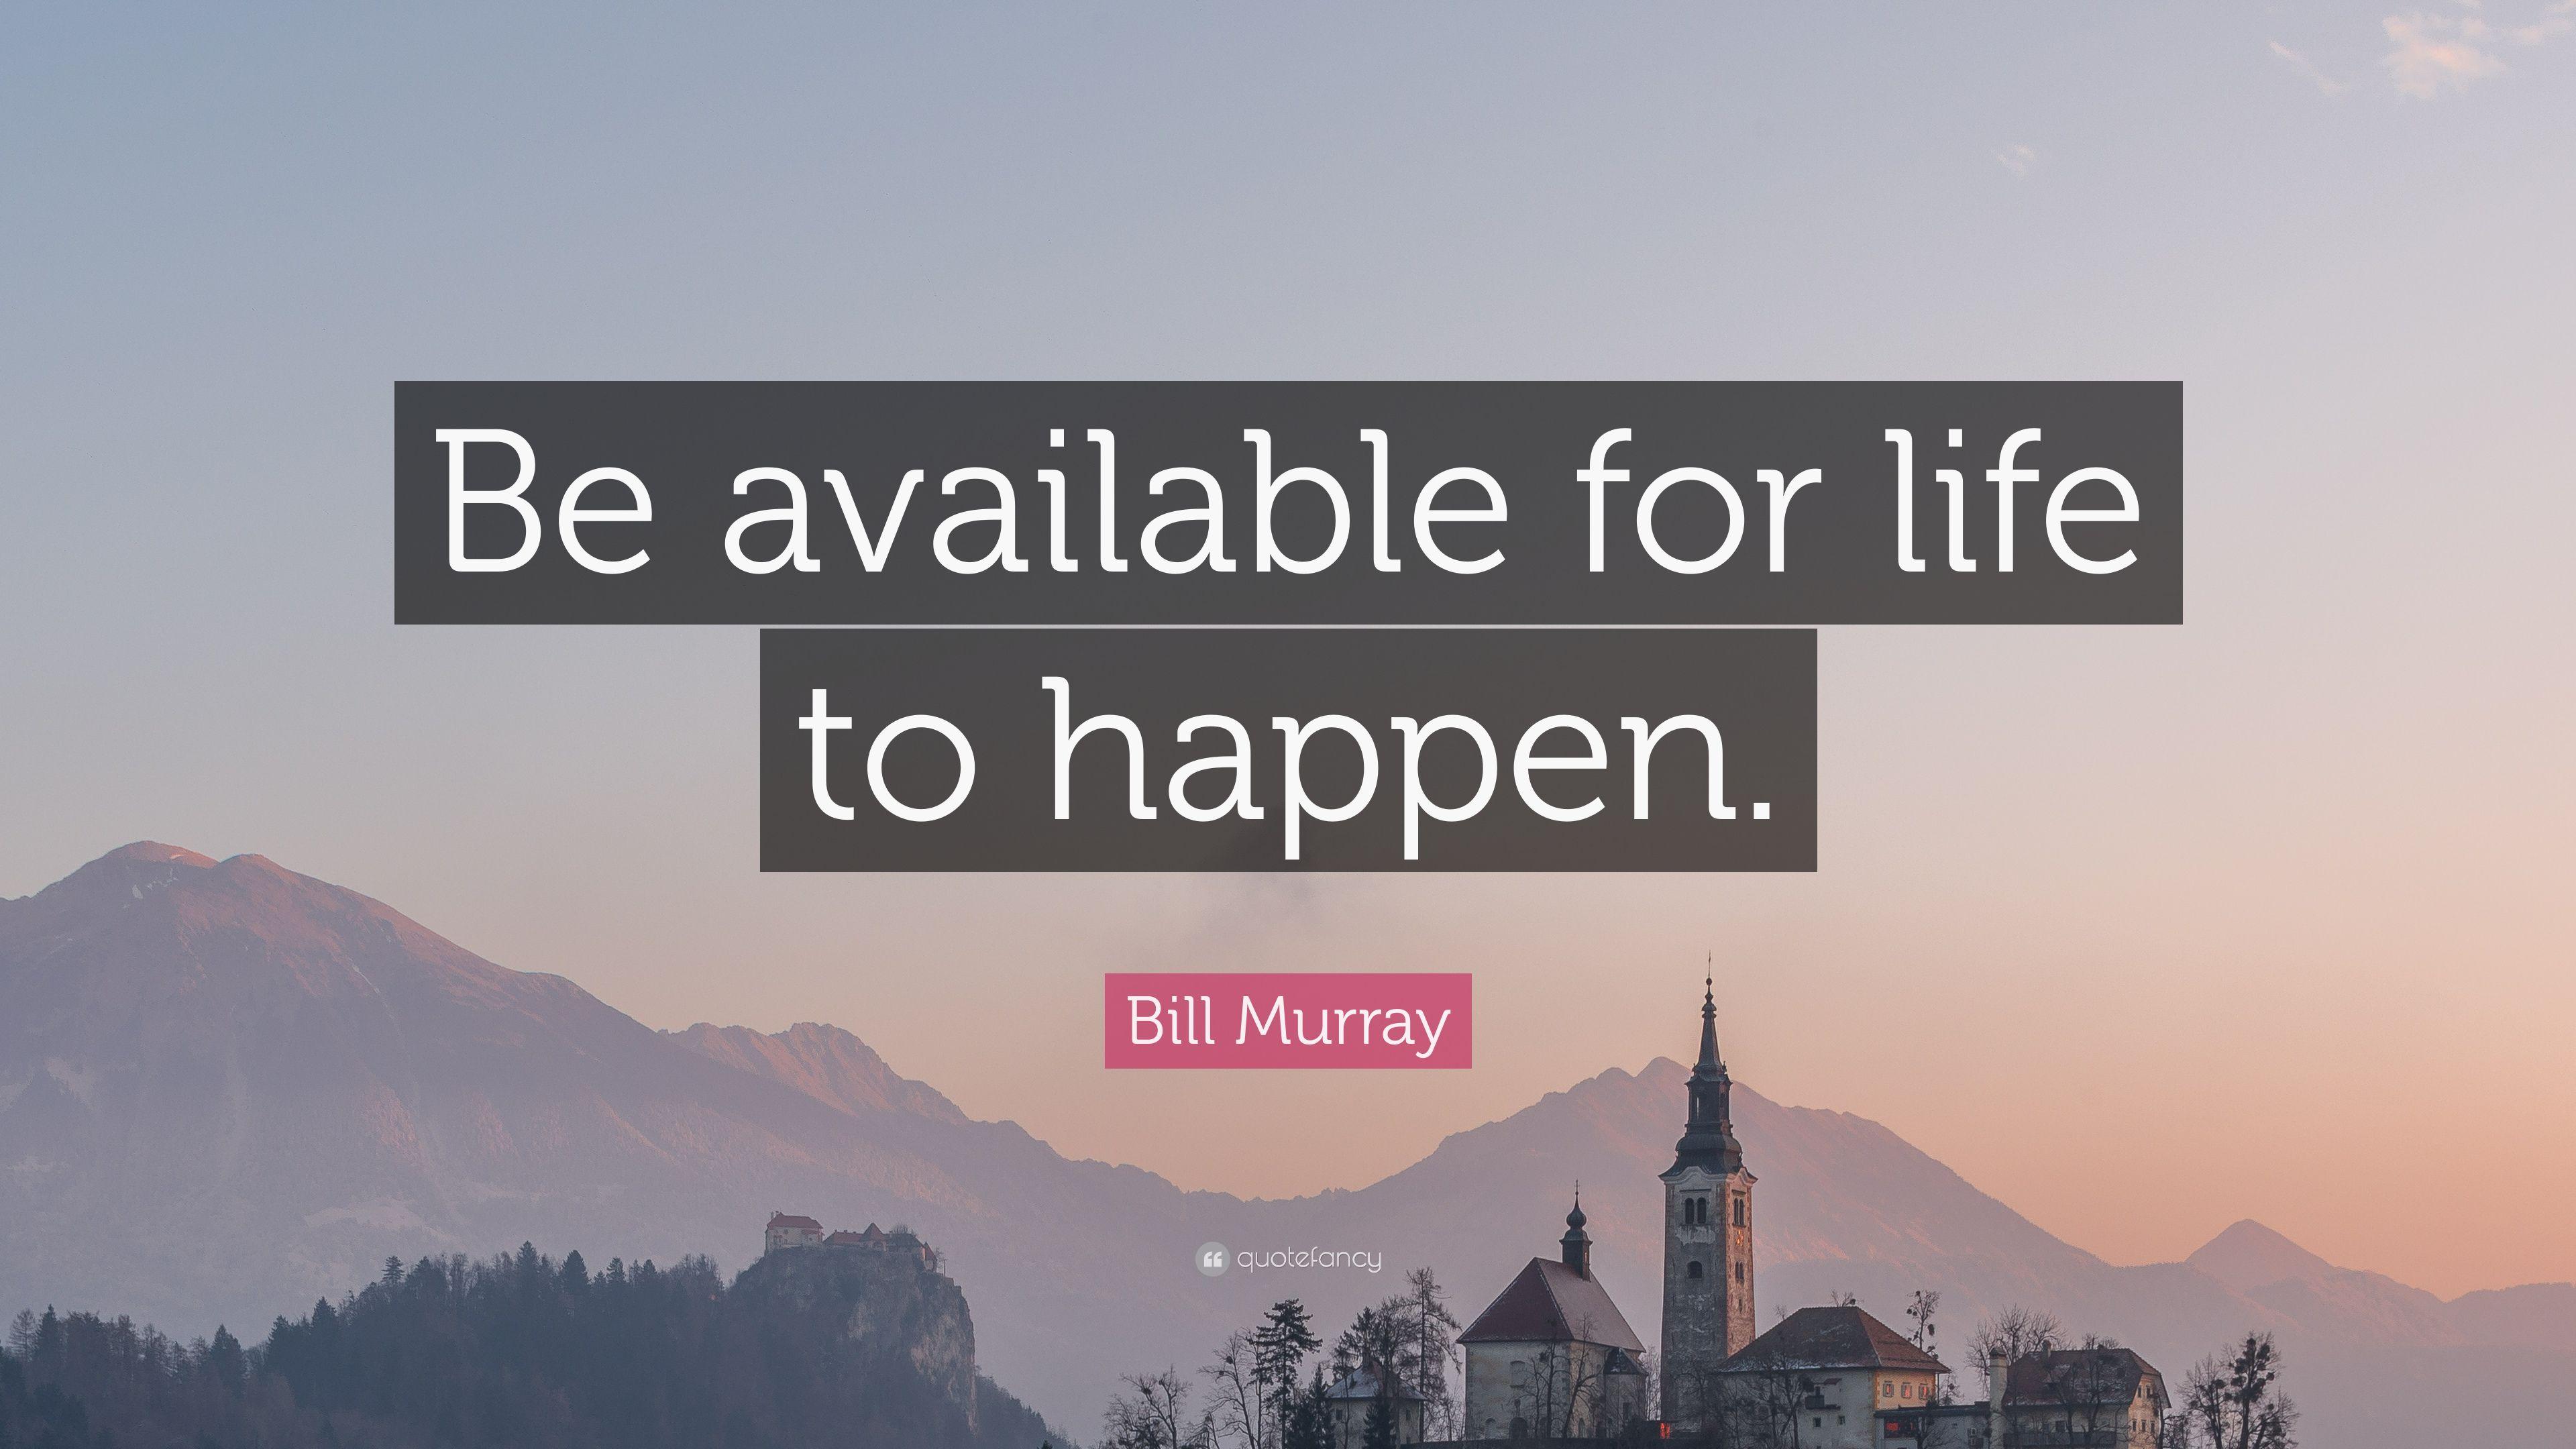 Bill Murray Quote: “Be available for life to happen.” 7